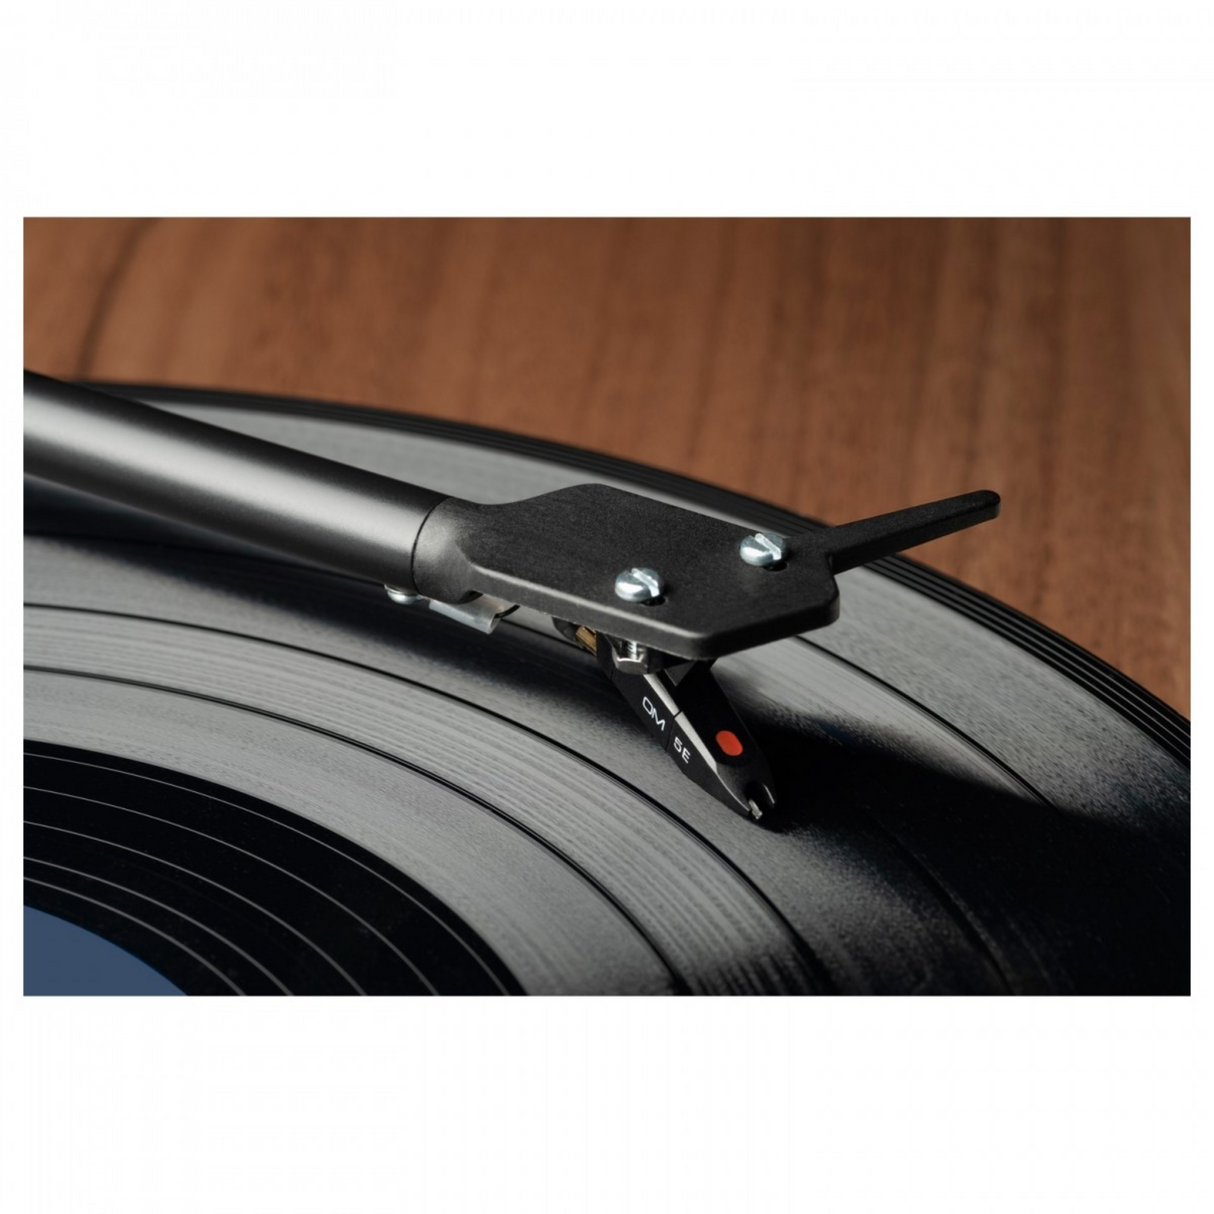 Pro-Ject E1 Turntable